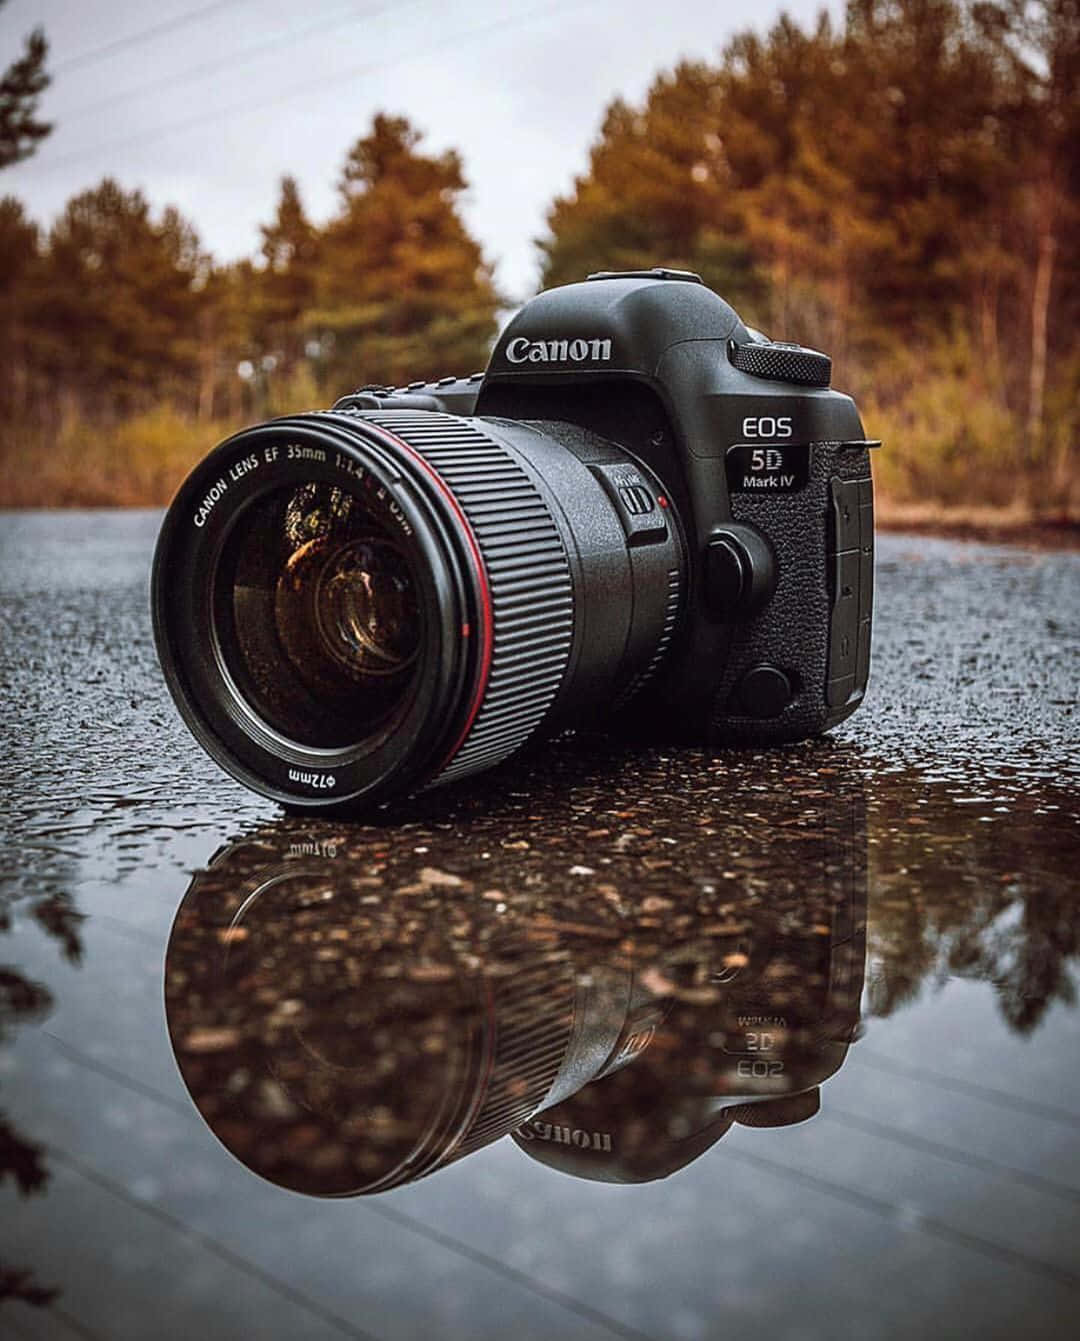 Take your photography to the next level with a DSLR Camera